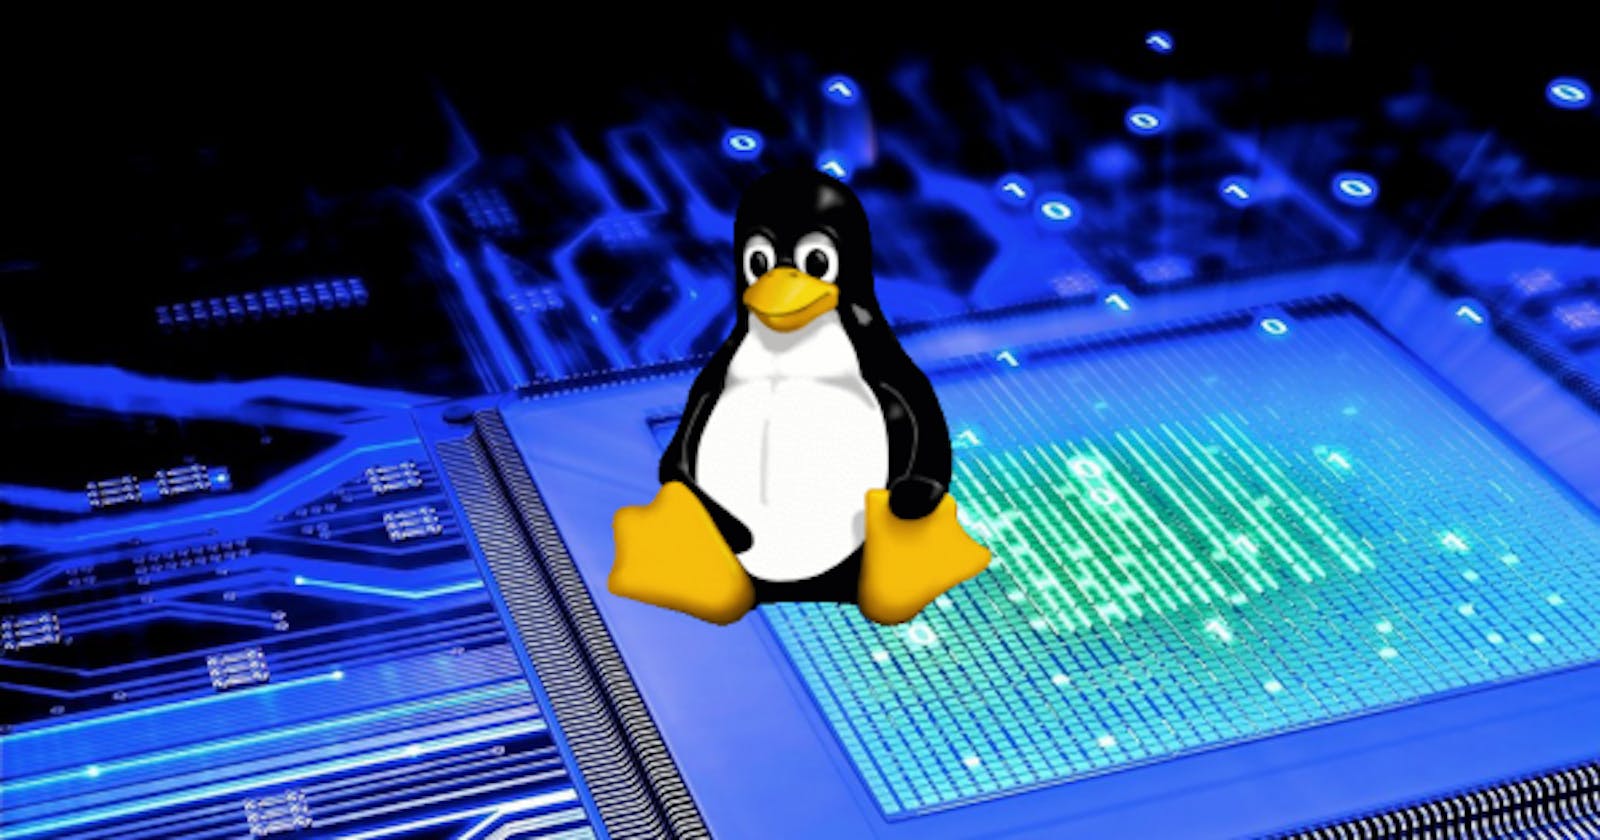 Basic Linux Commands Every Beginner Should Know